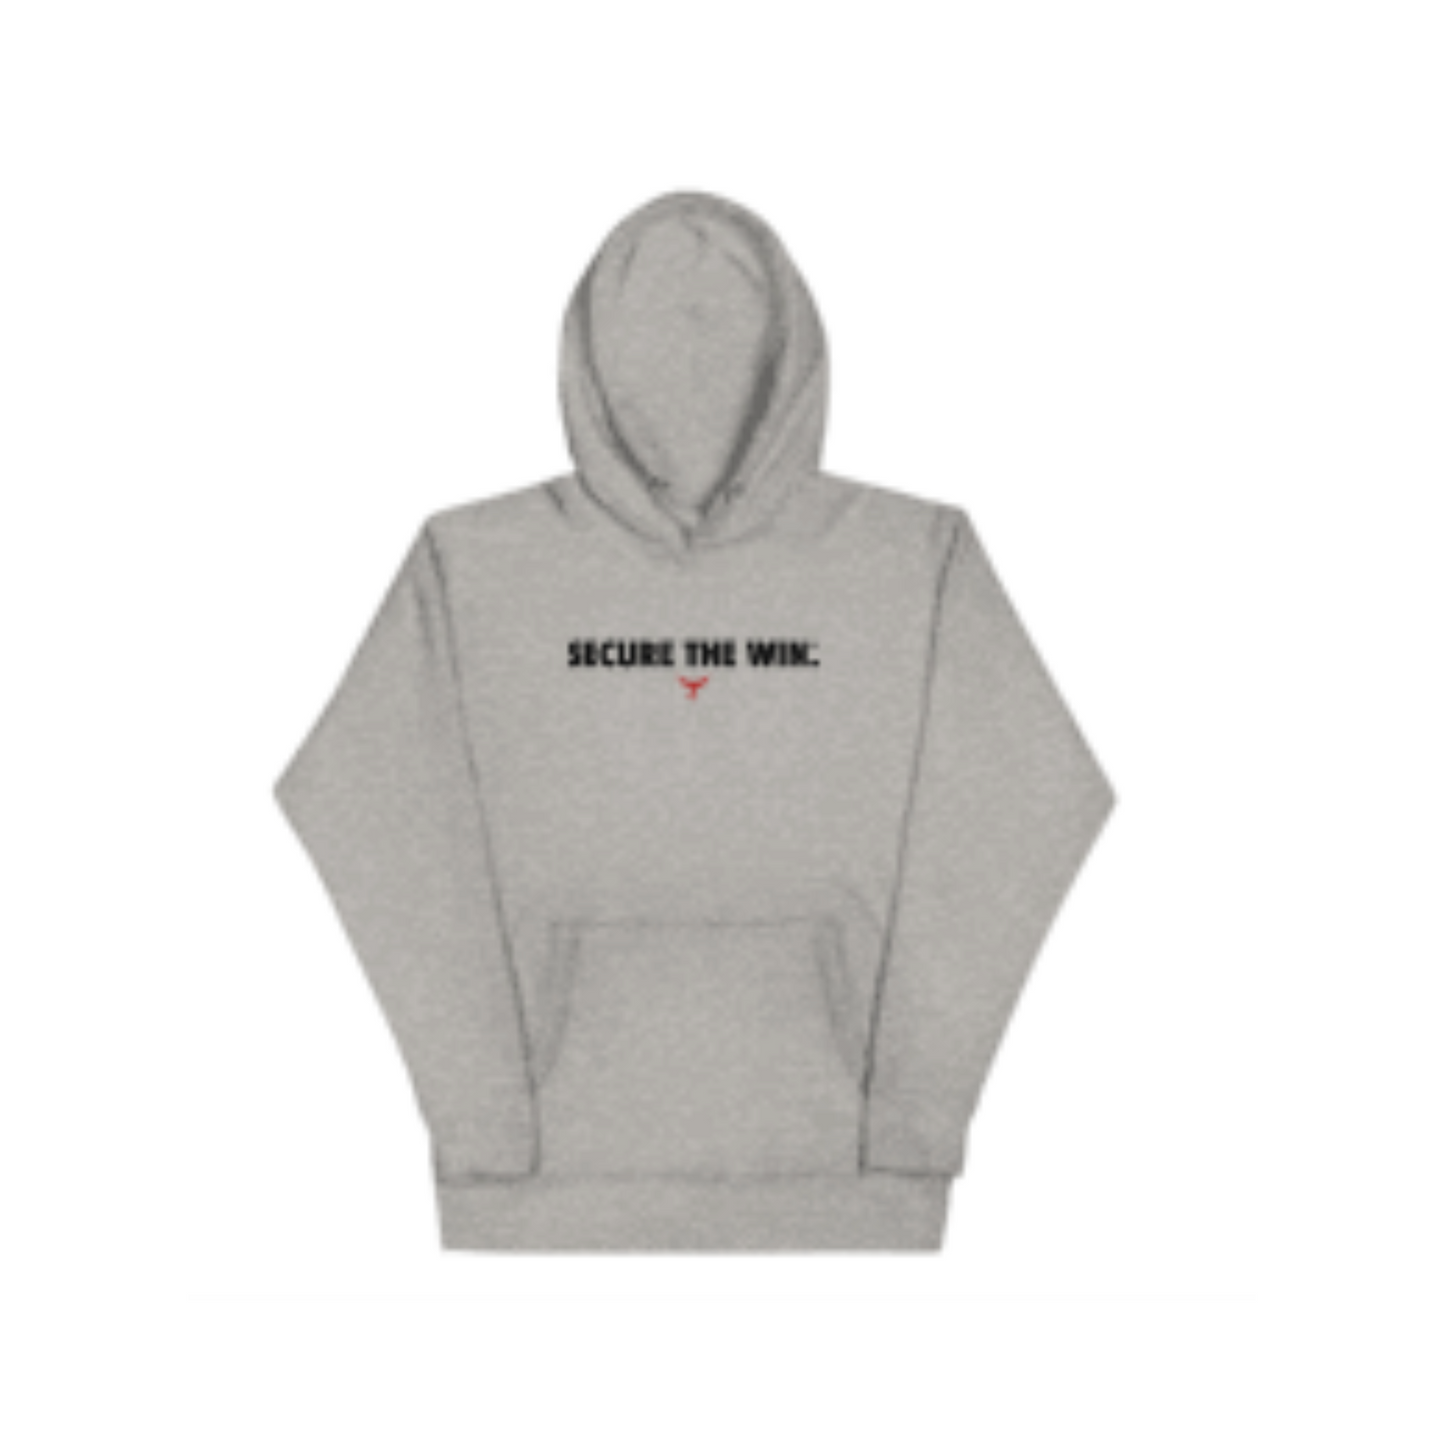 Secure The Win. HoodieProudly Designed In Atlanta, GA - The Secure The Win. Hoodie features the classic Win. Logo on 100% Cotton fabric to help keep you comfortable. Fits true to size. The Win BrandSecure